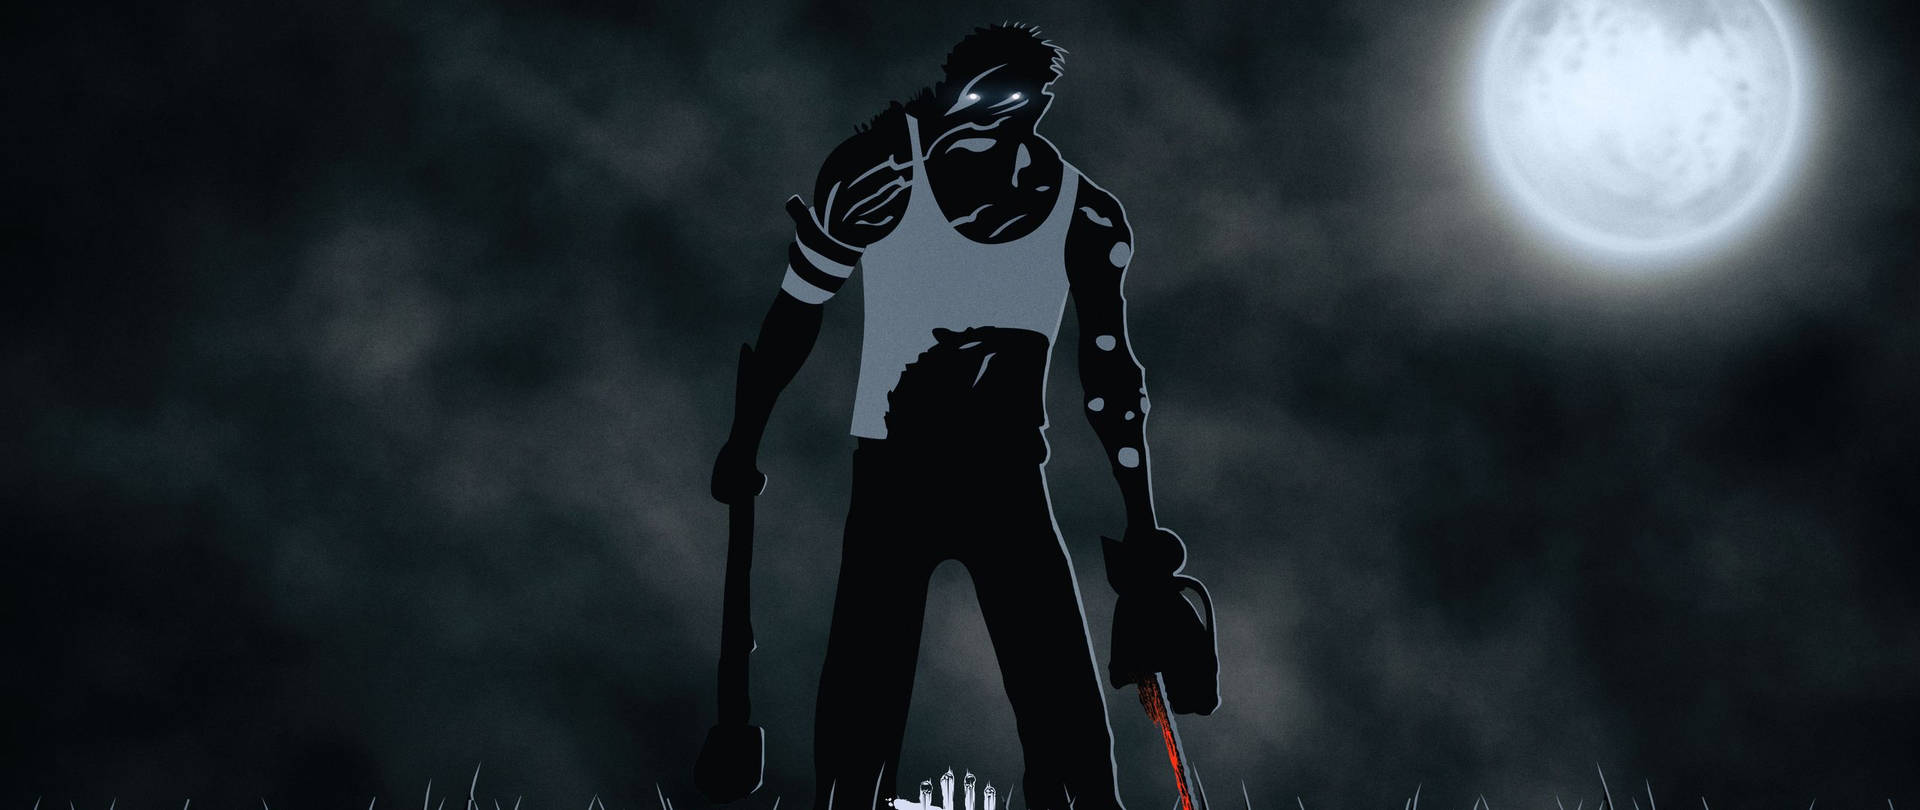 Dead By Daylight The Hillbilly Moon Silhouette Background